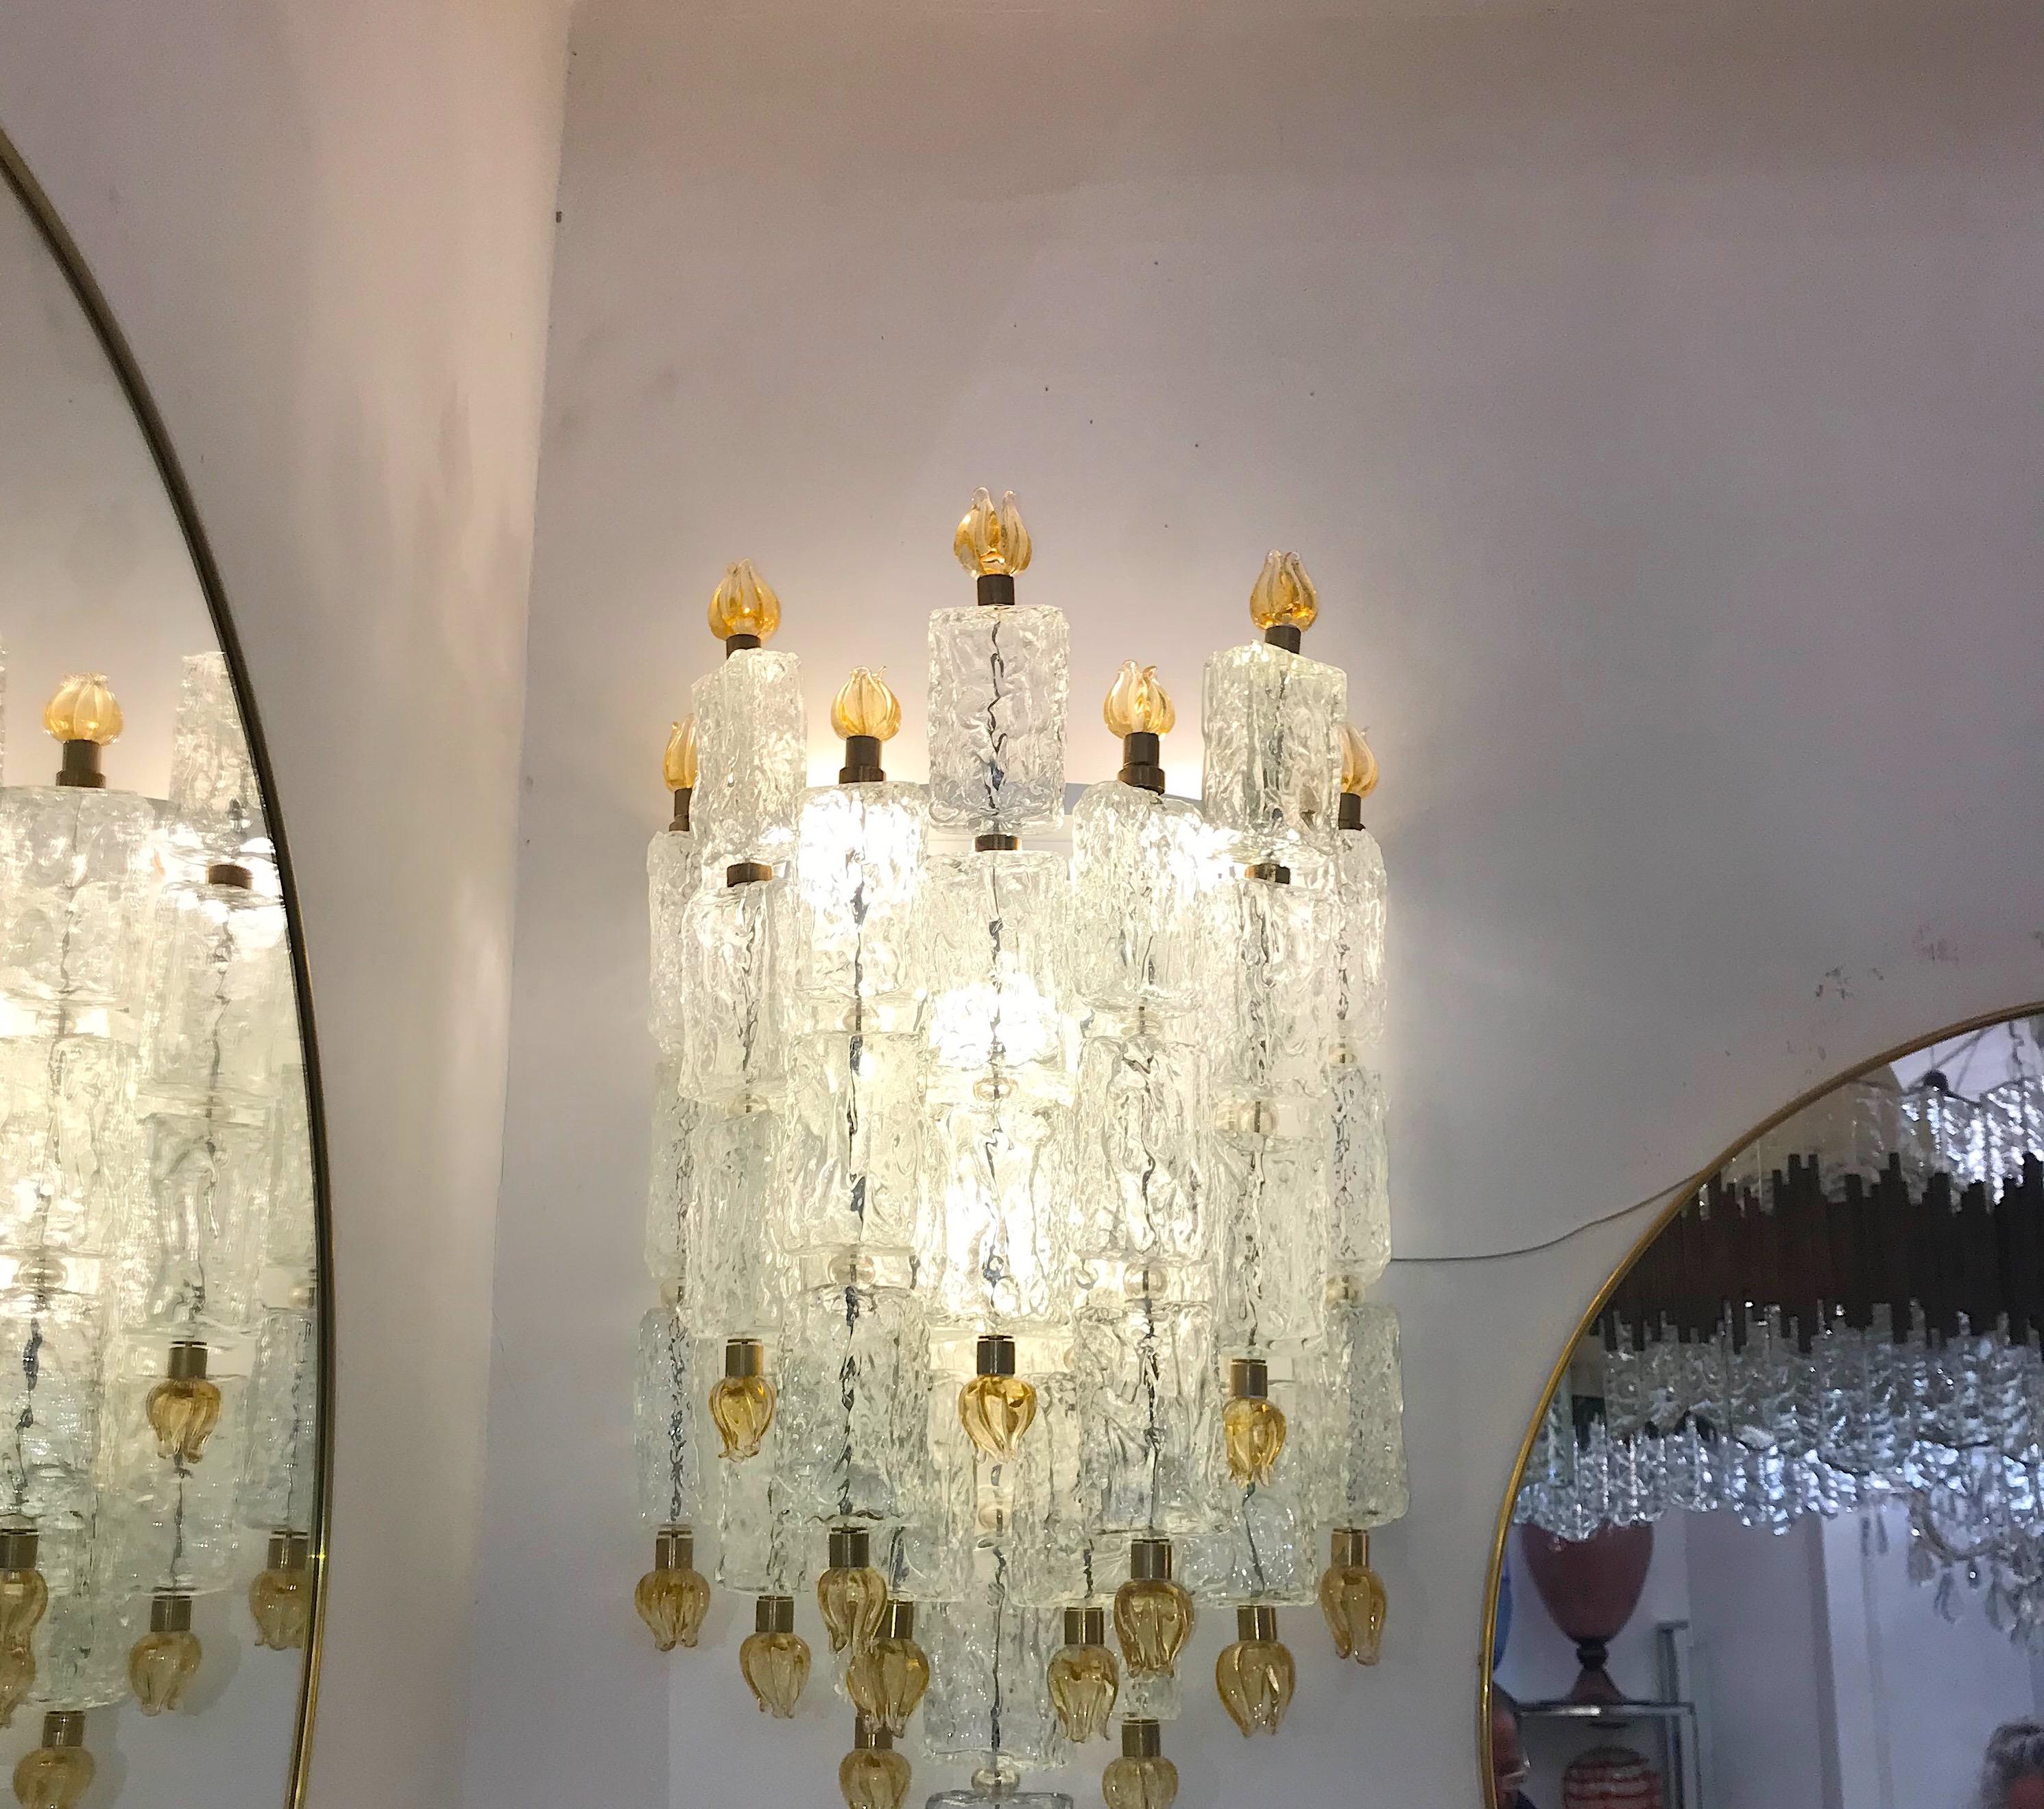 Pair of Barovier & Toso Glass Blocks with Gold Tulip Sconces, 1940 For Sale 2